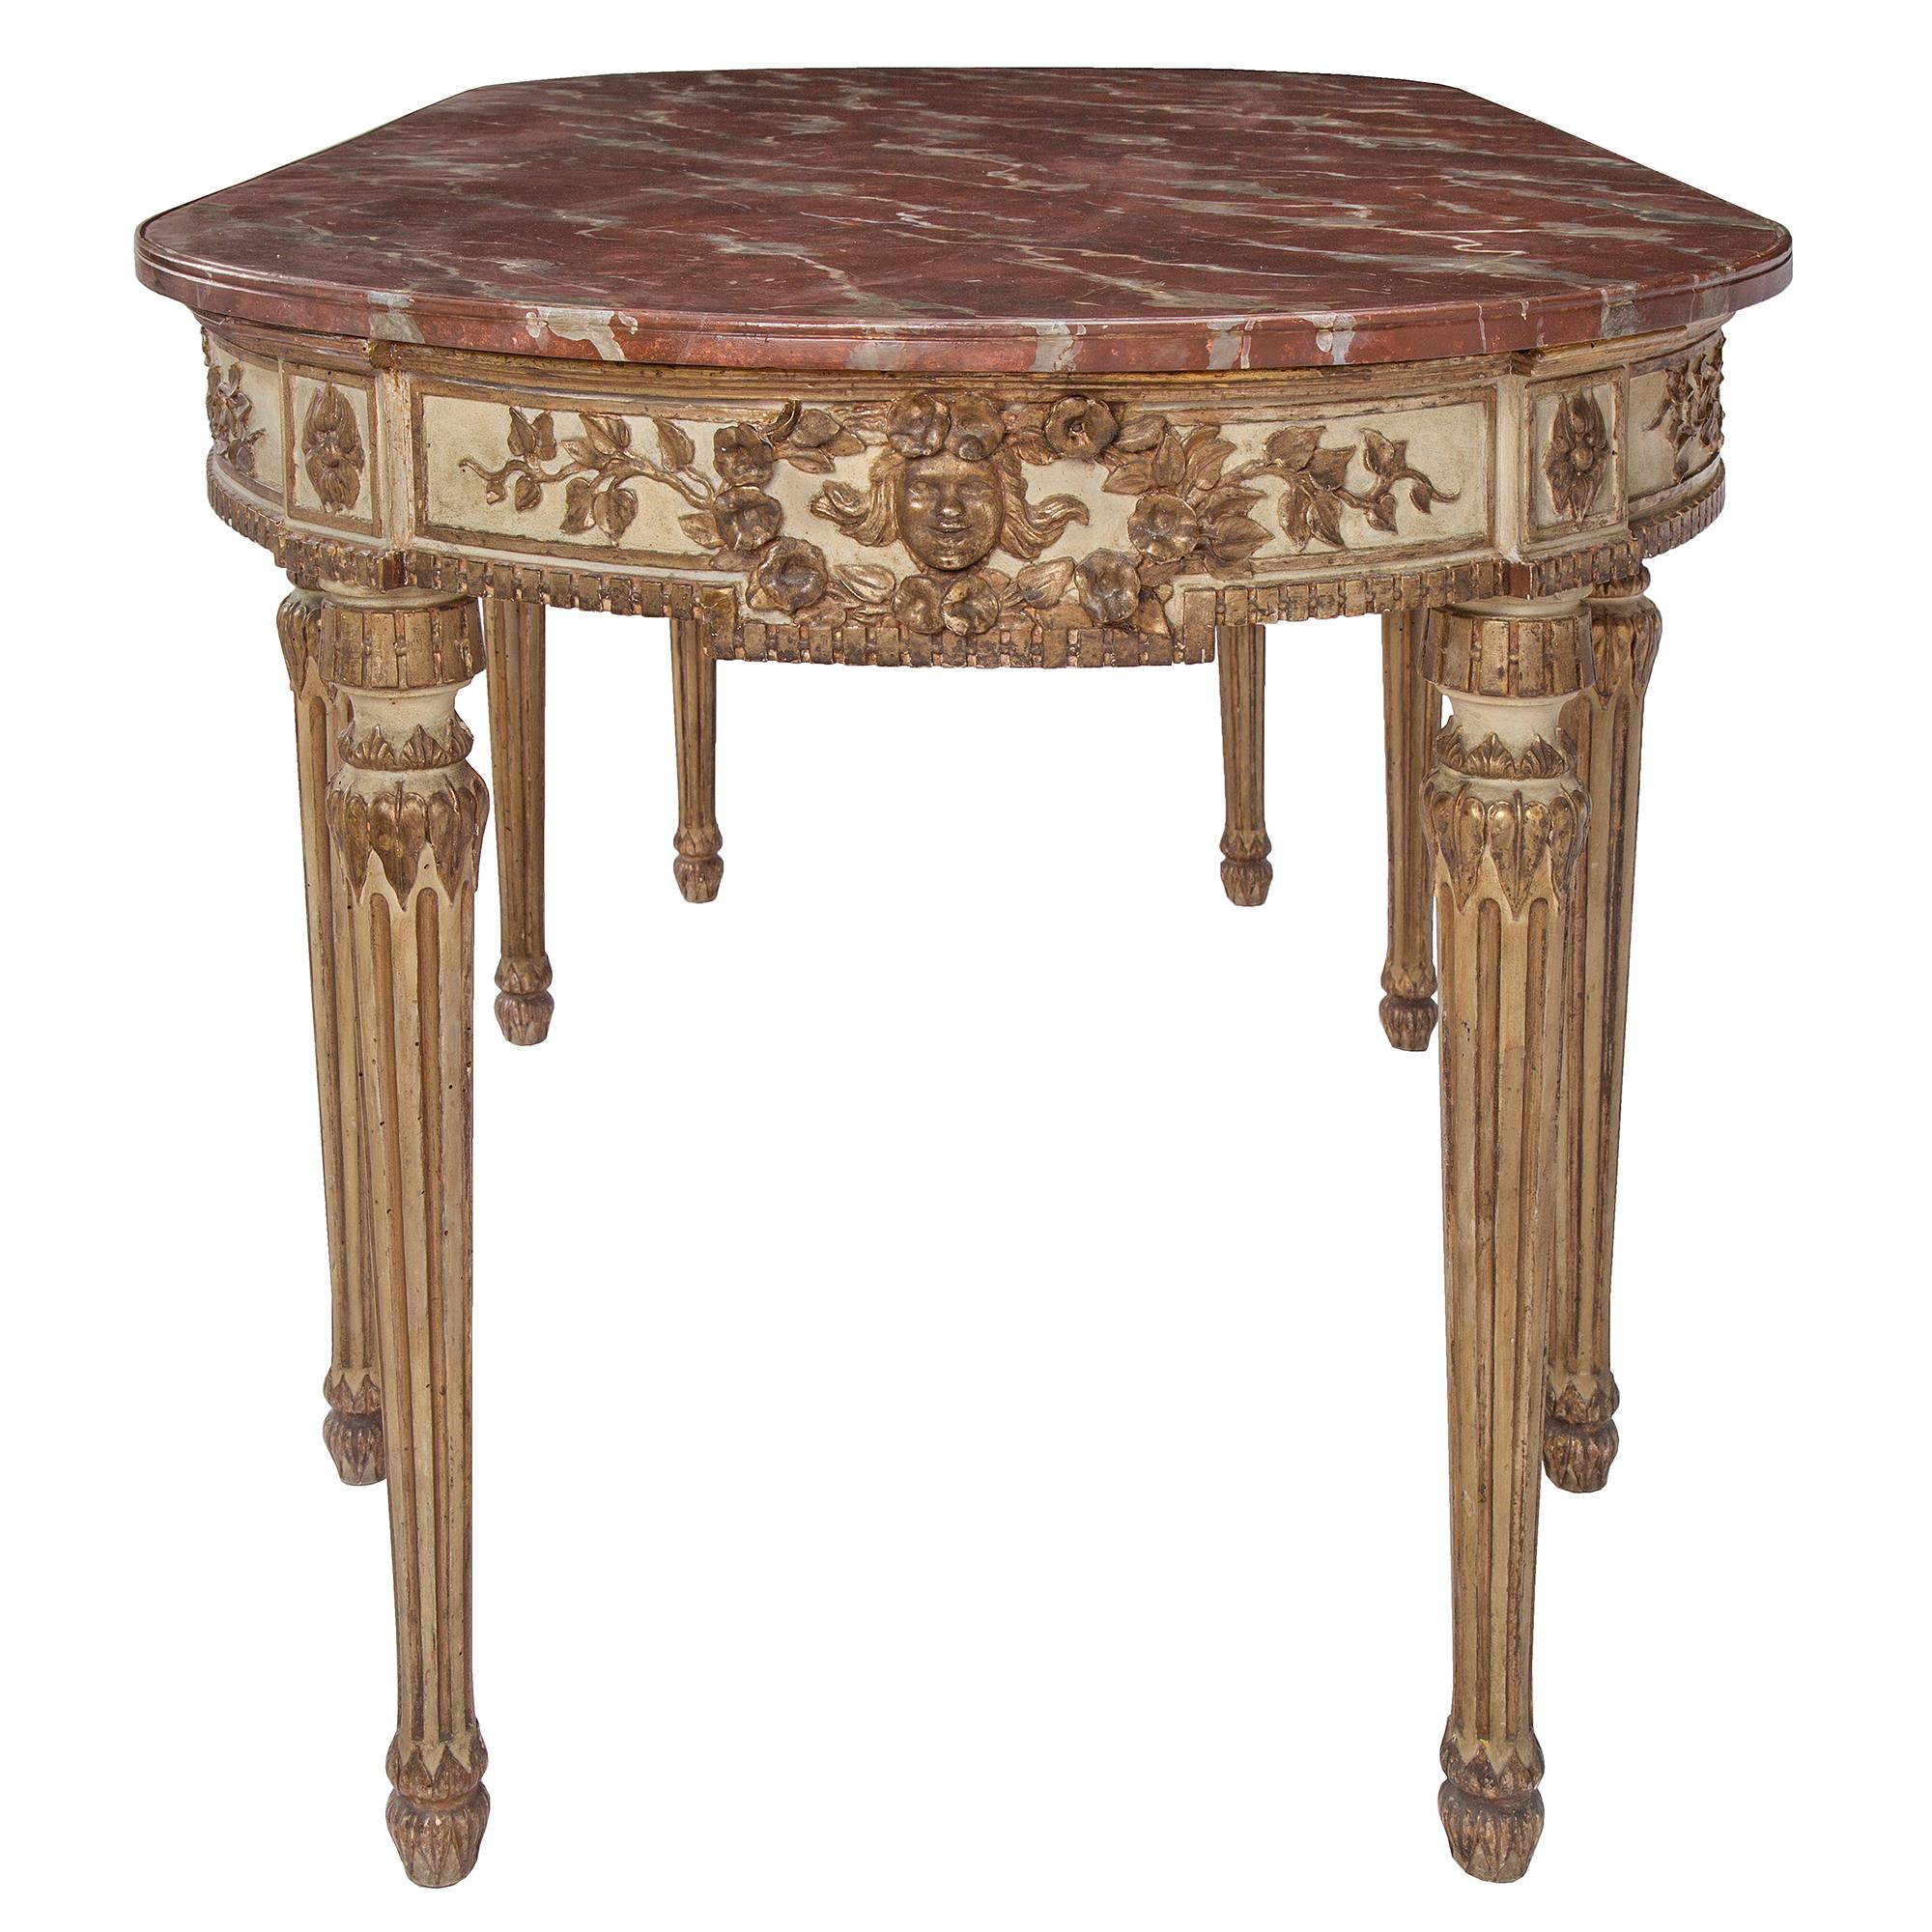 Italian 19th Century Louis XVI Style Eight Leg Oval Center Table from Naples In Good Condition For Sale In West Palm Beach, FL